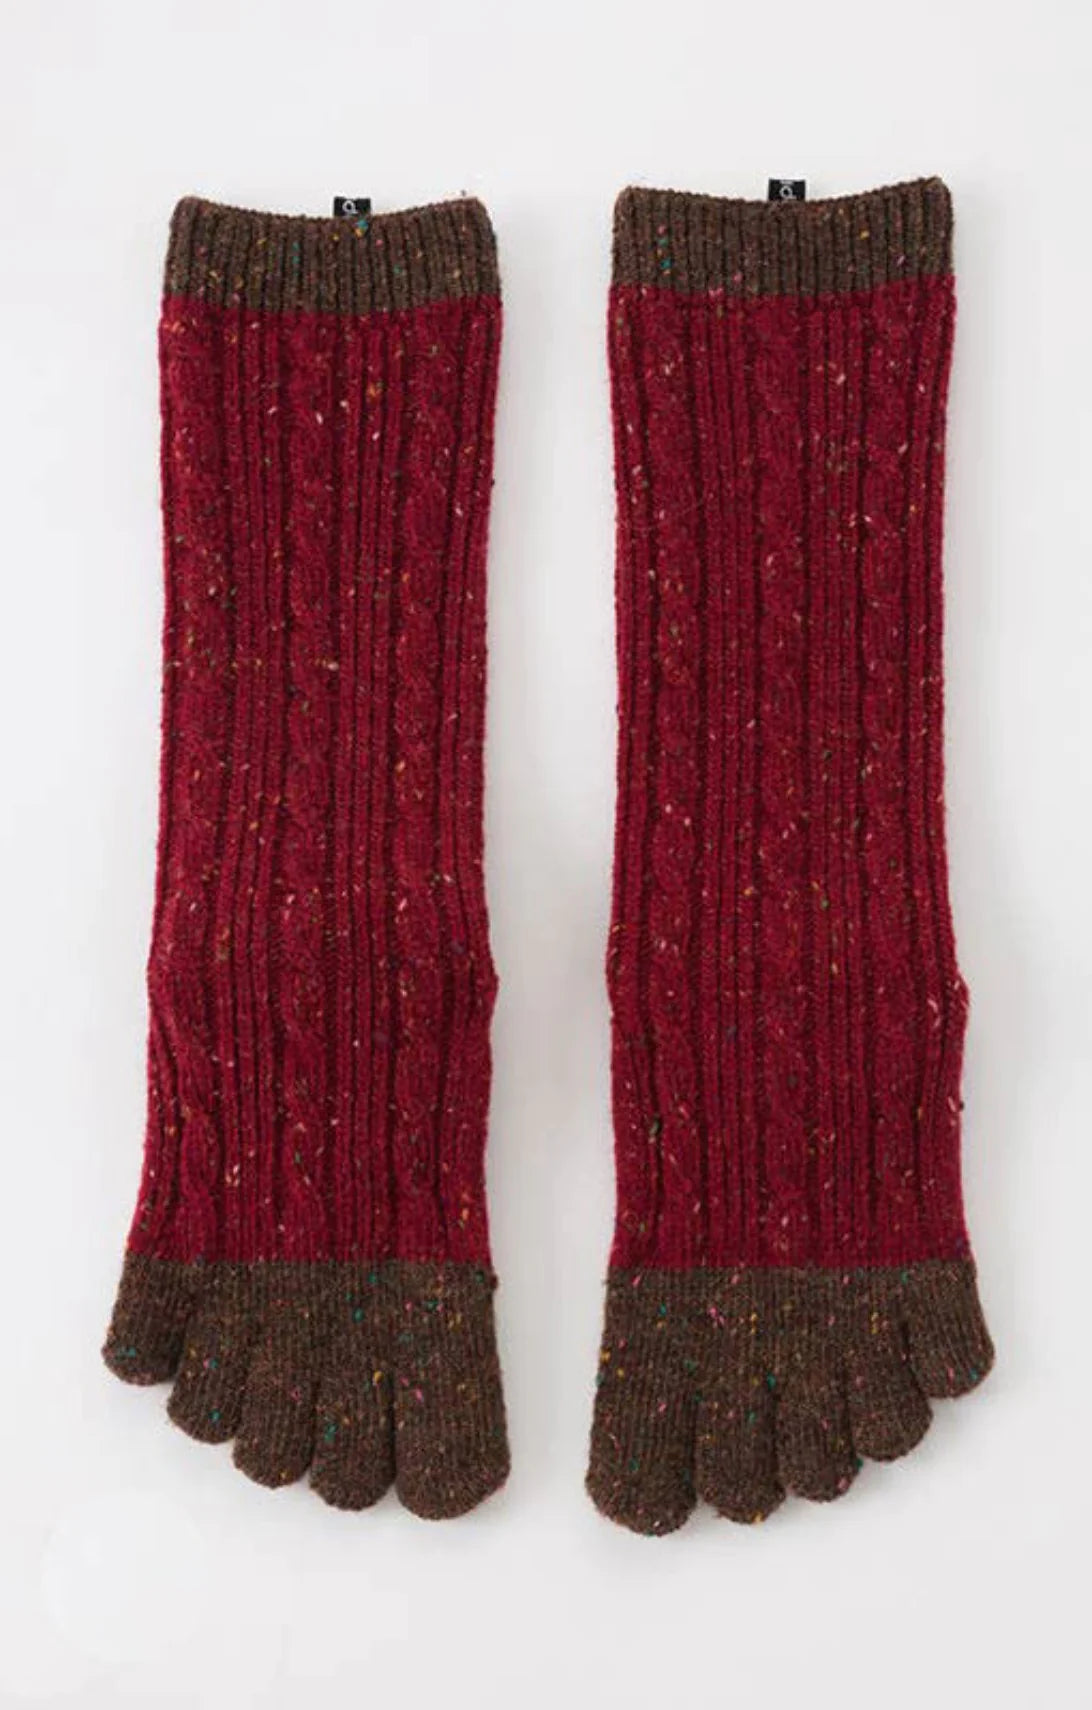 Knitido plus's Wool Blend Cable Confetti Midcalf Socks in Dark red